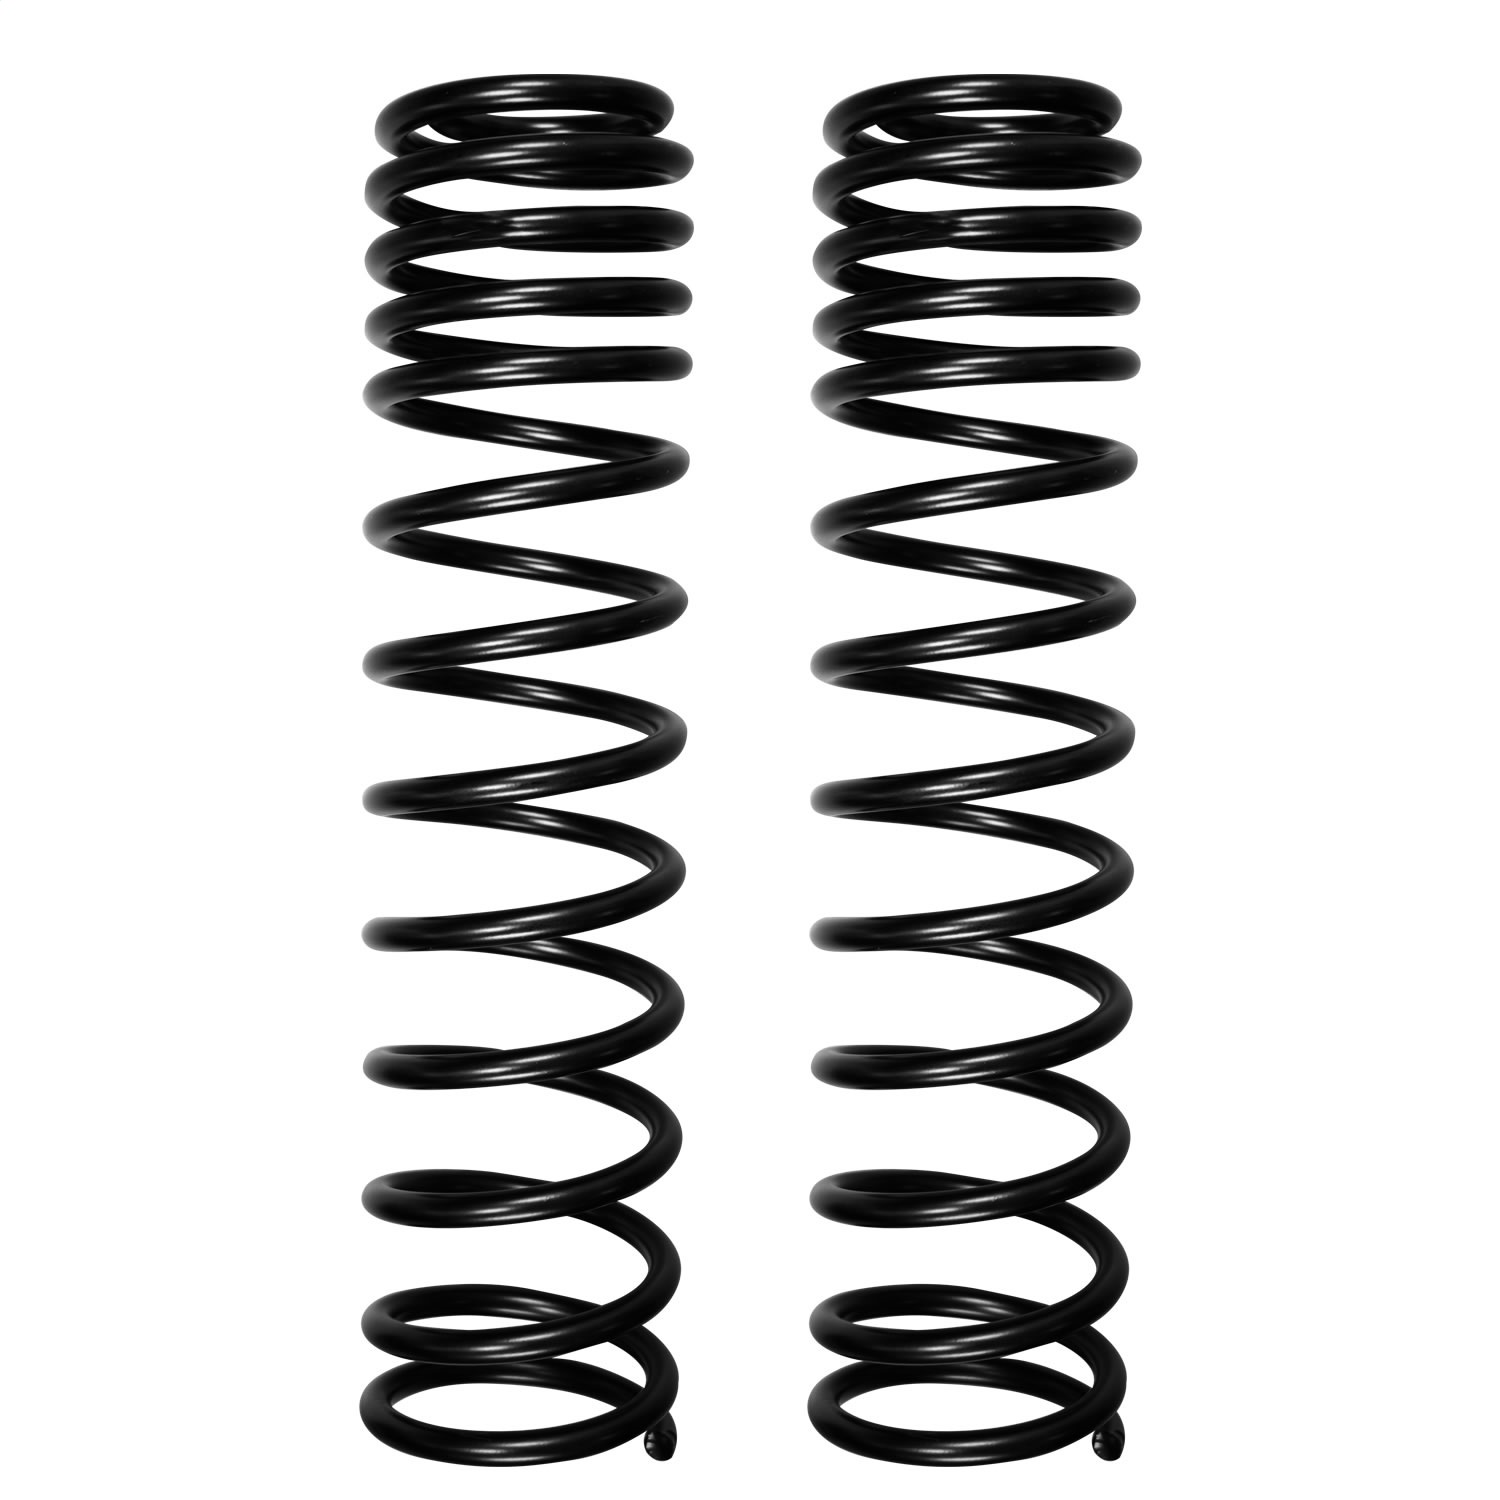 JKU25FDR Dual-Rate Long Travel Front Coil Springs, Lift: 2-2.5 in.